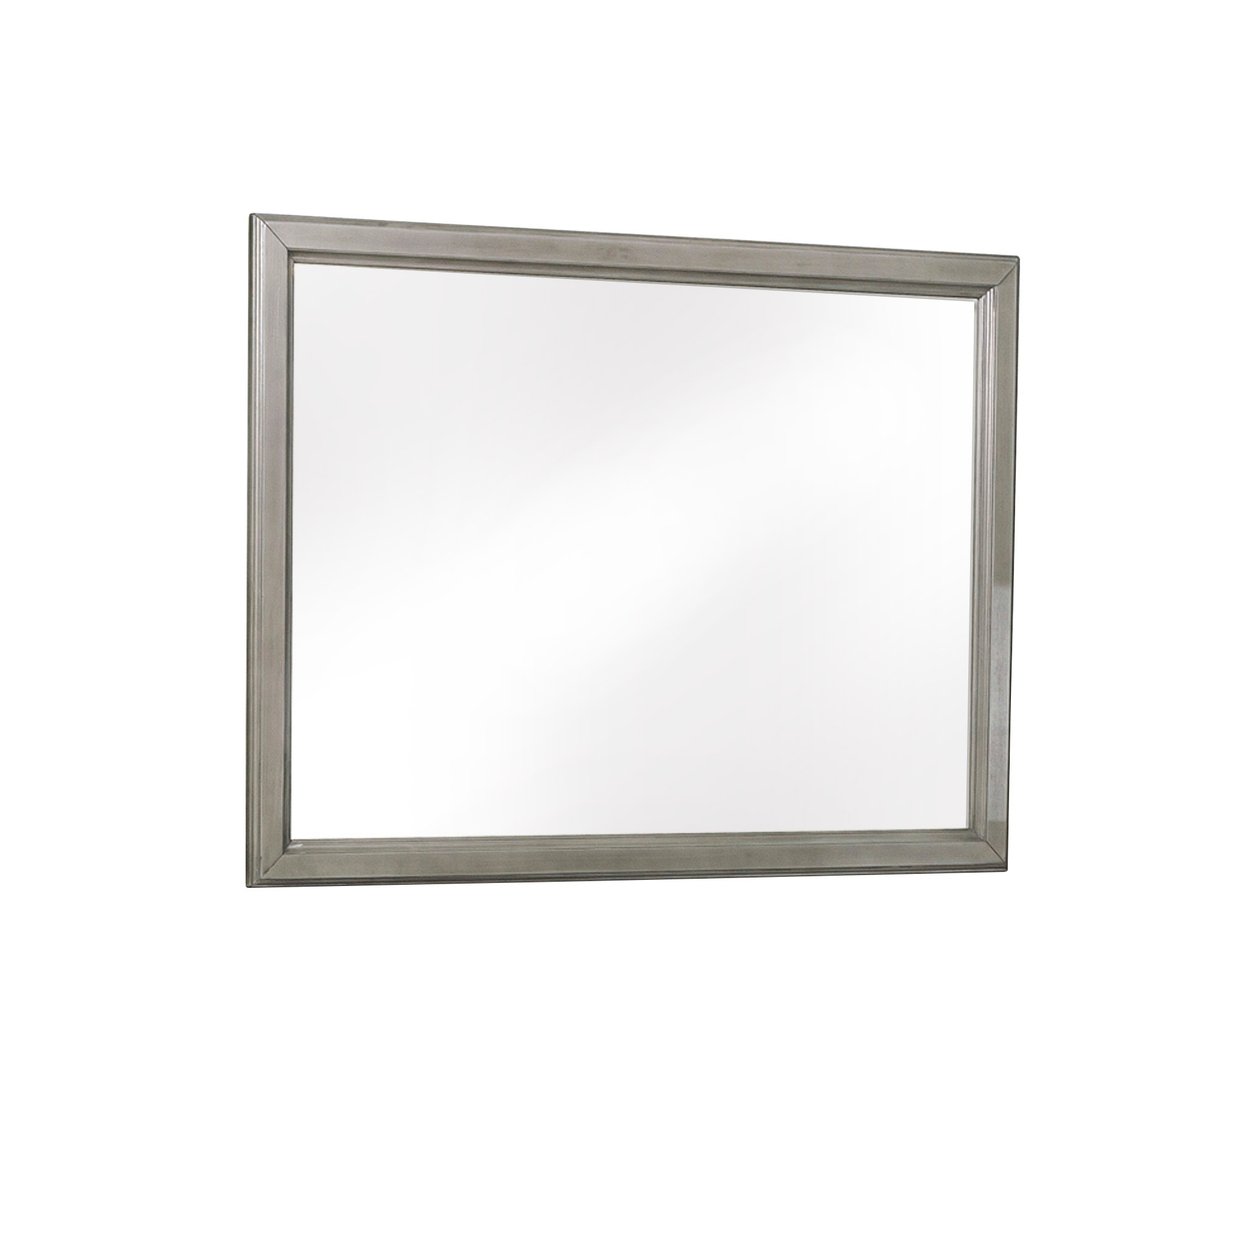 Wooden Square Mirror With Molded Details And Dual Texture, Gray- Saltoro Sherpi